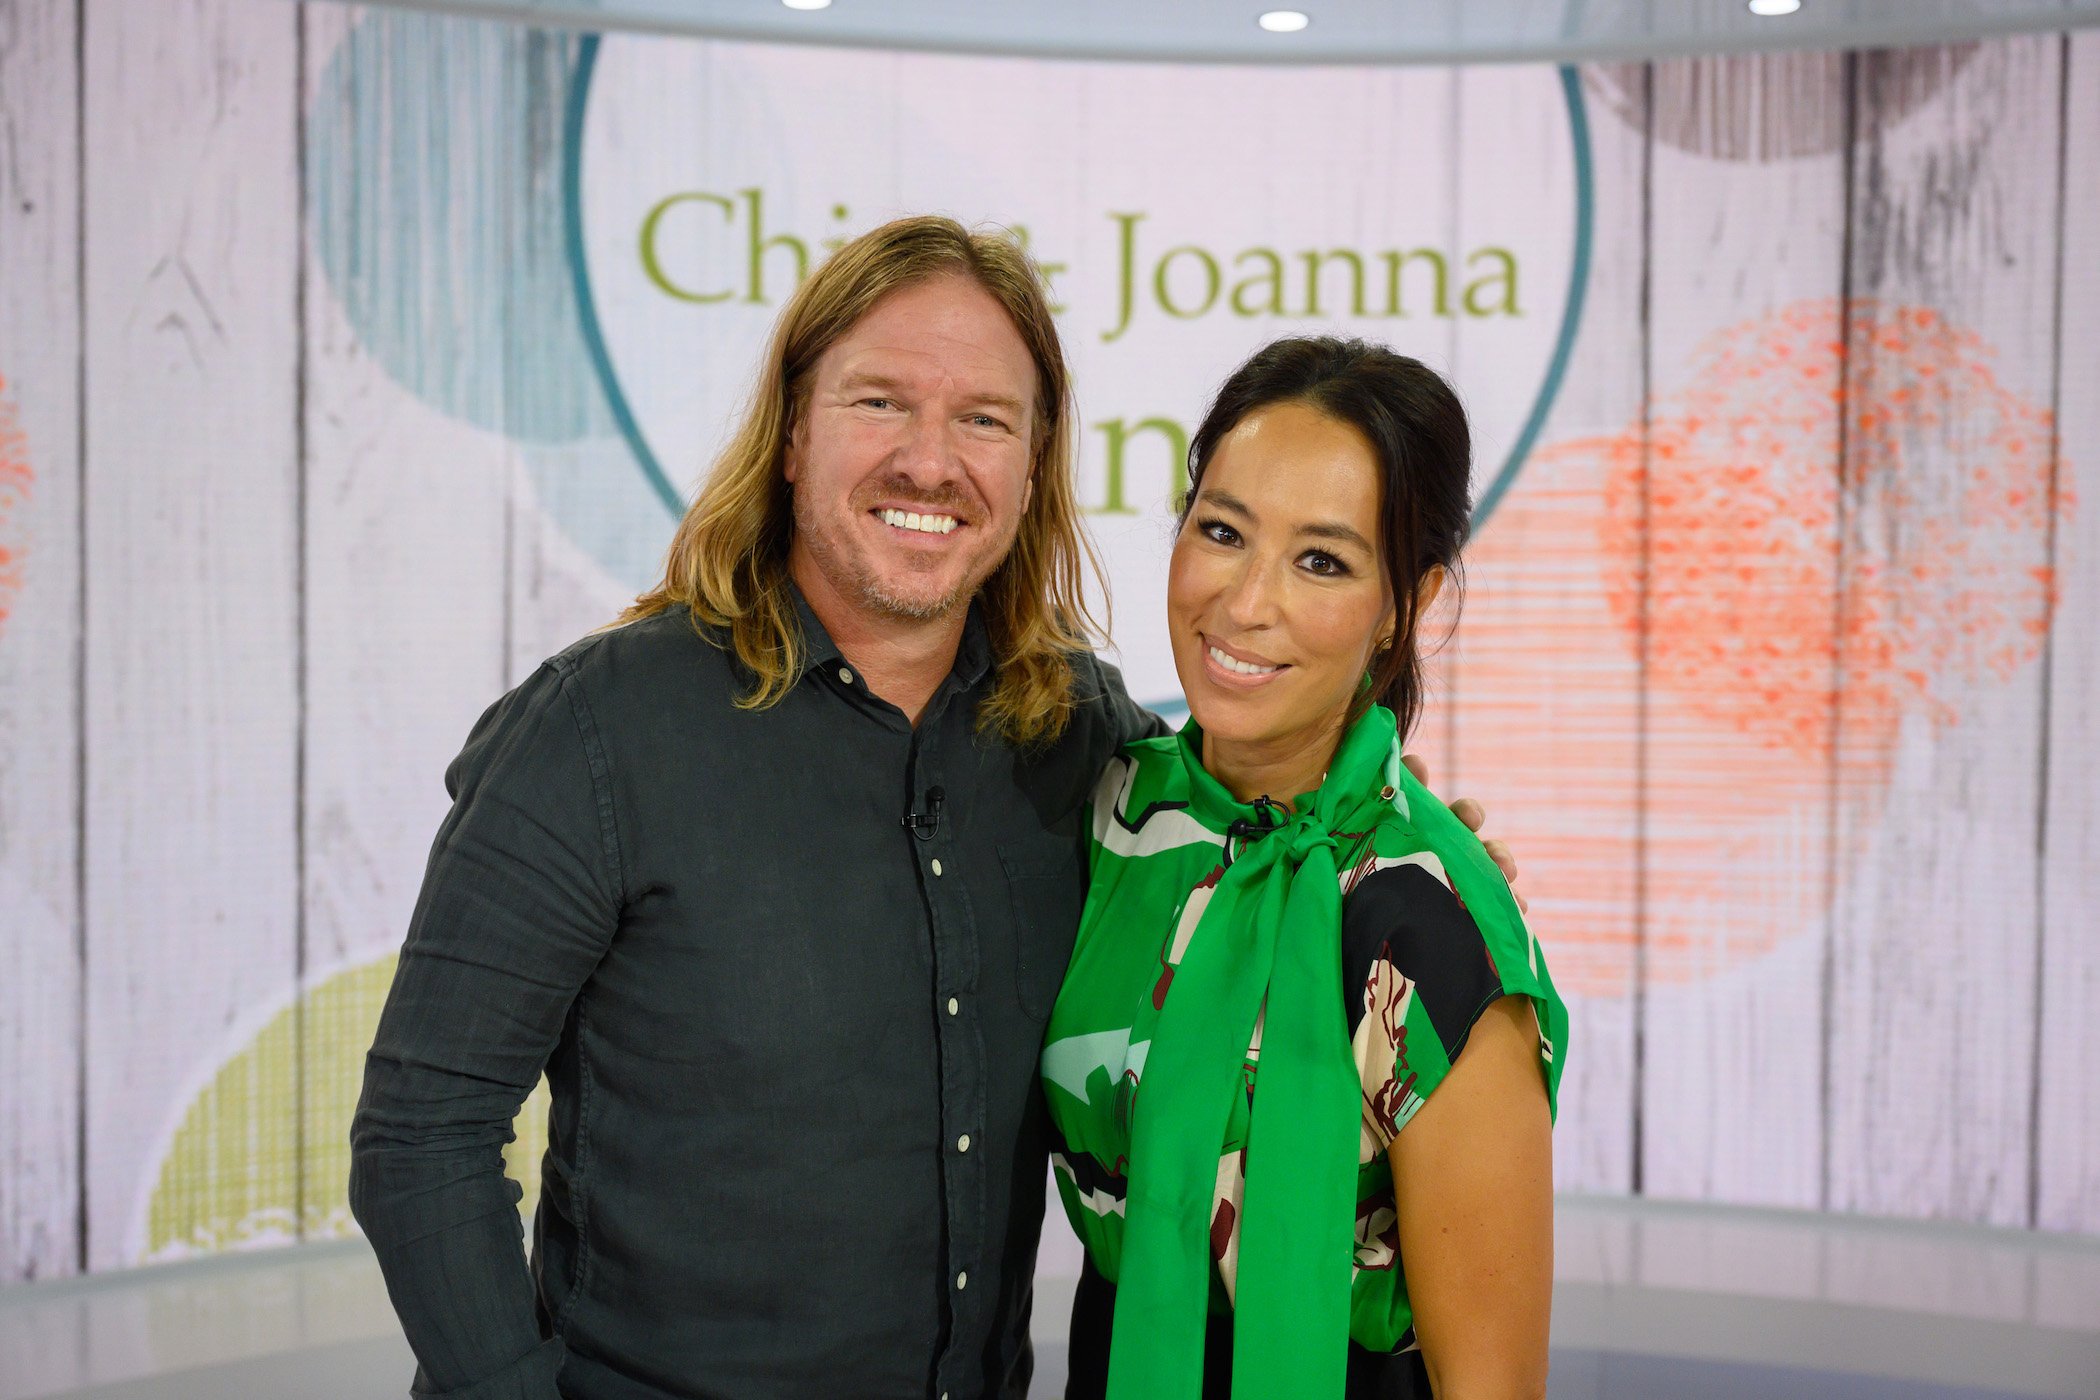 Chip and Joanna Gaines smiling together in front of a sign that says their name